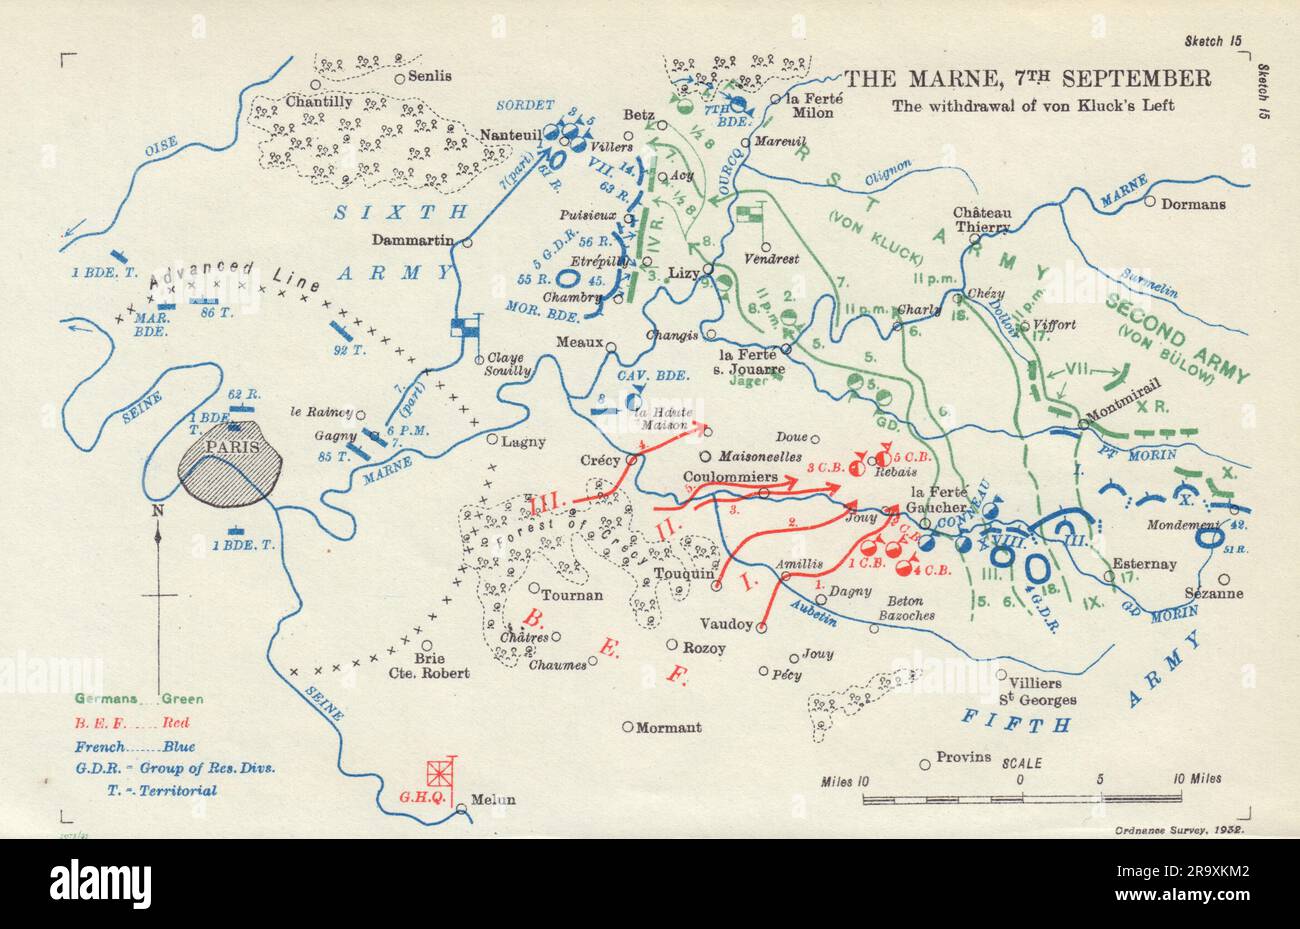 Battle of the Marne 7th September 1914. Withdrawal of von Kluck's Left 1933 map Stock Photo